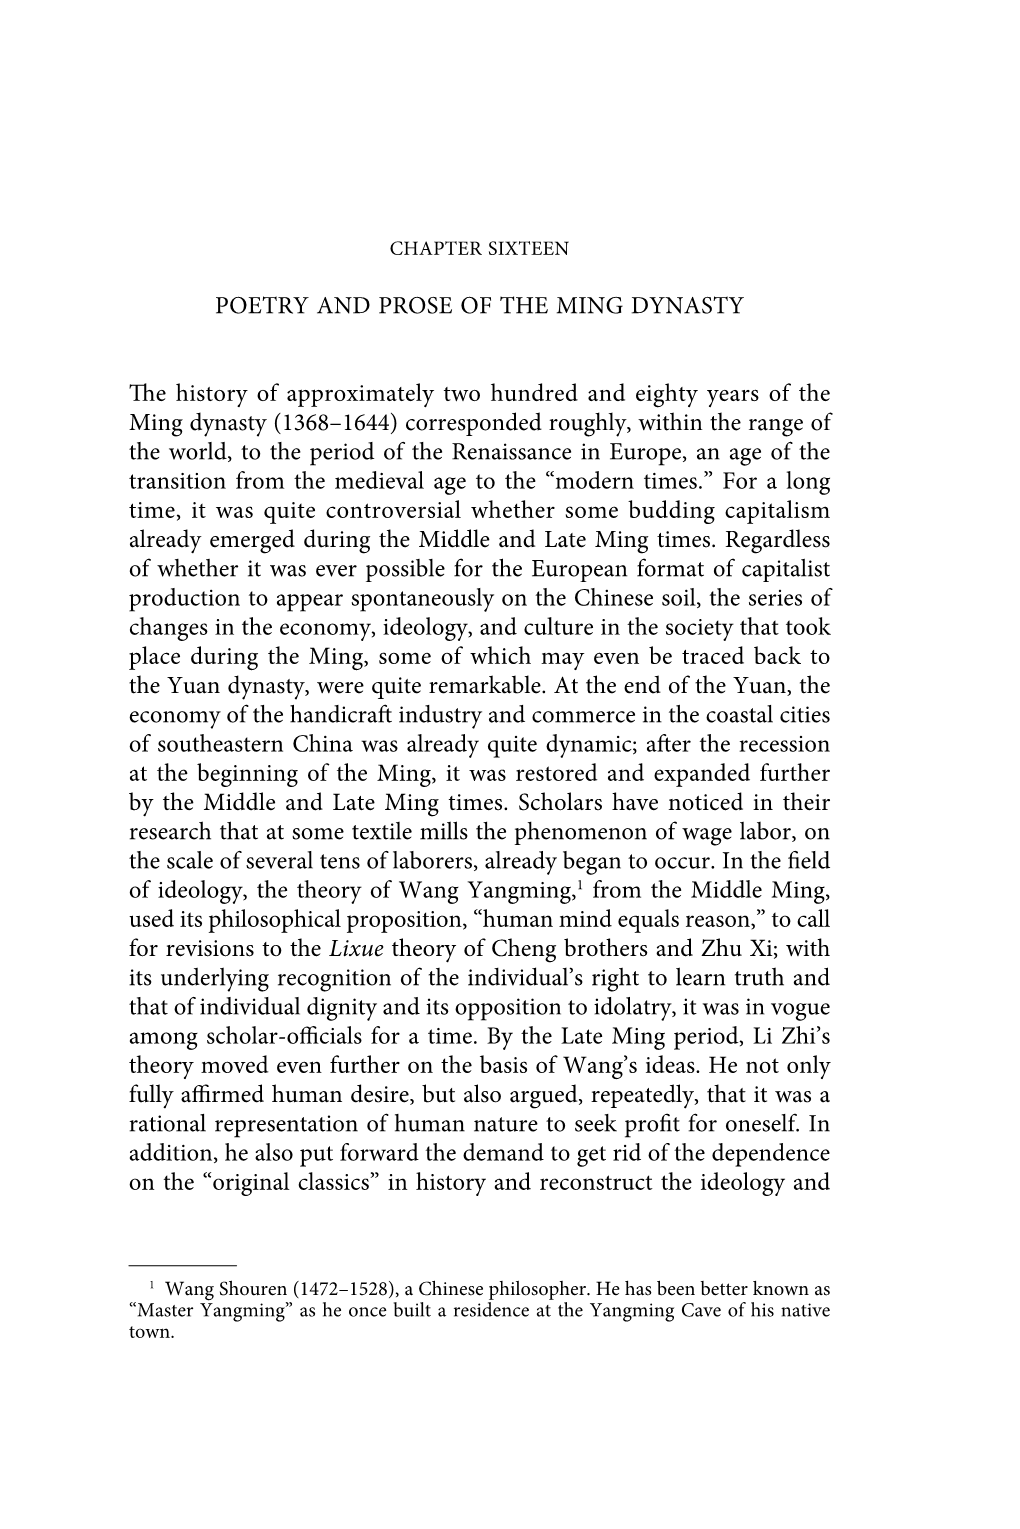 A Concise History of Chinese Literature